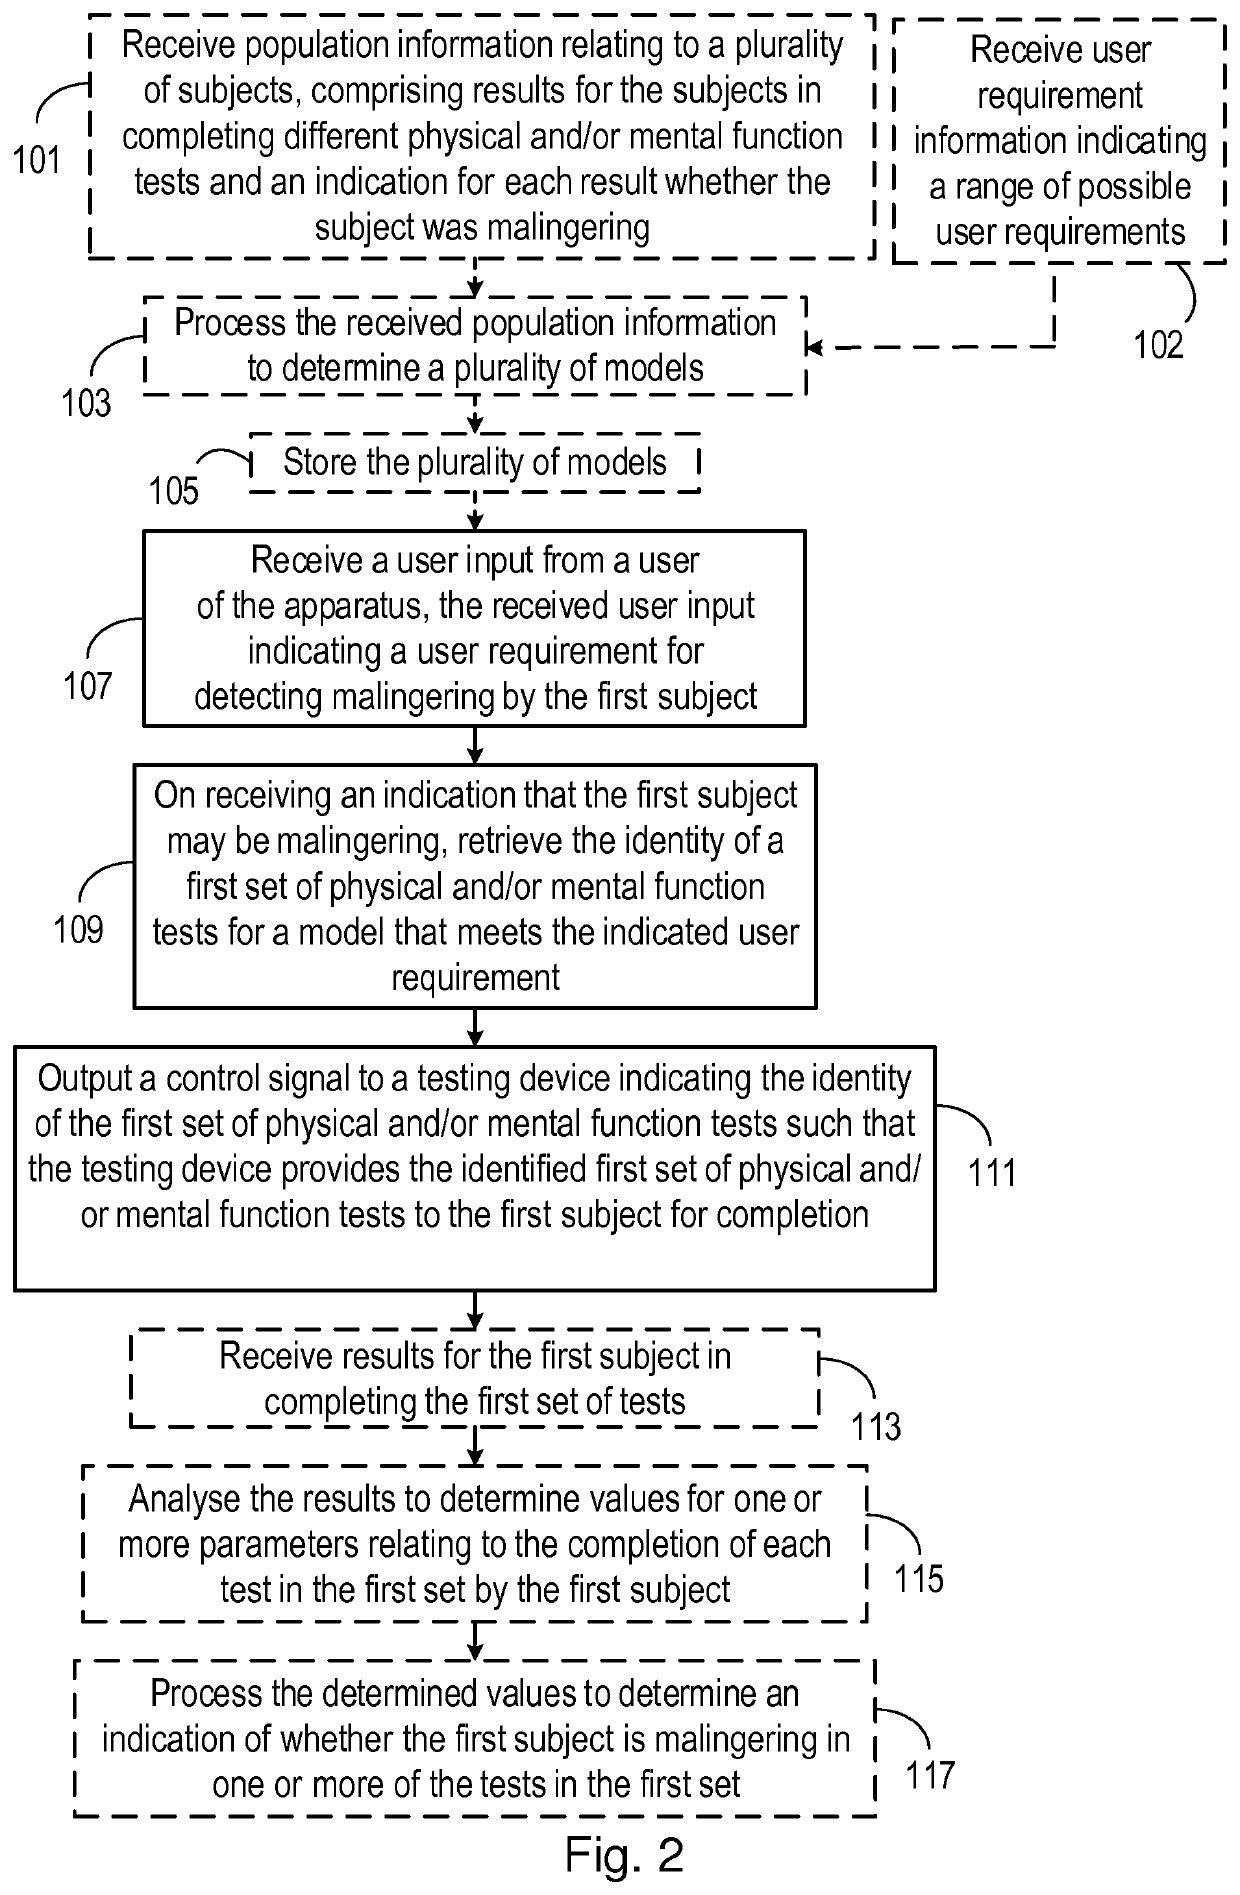 A method and apparatus for use in detecting malingering by a first subject in tests of physical and/or mental function of the first subject